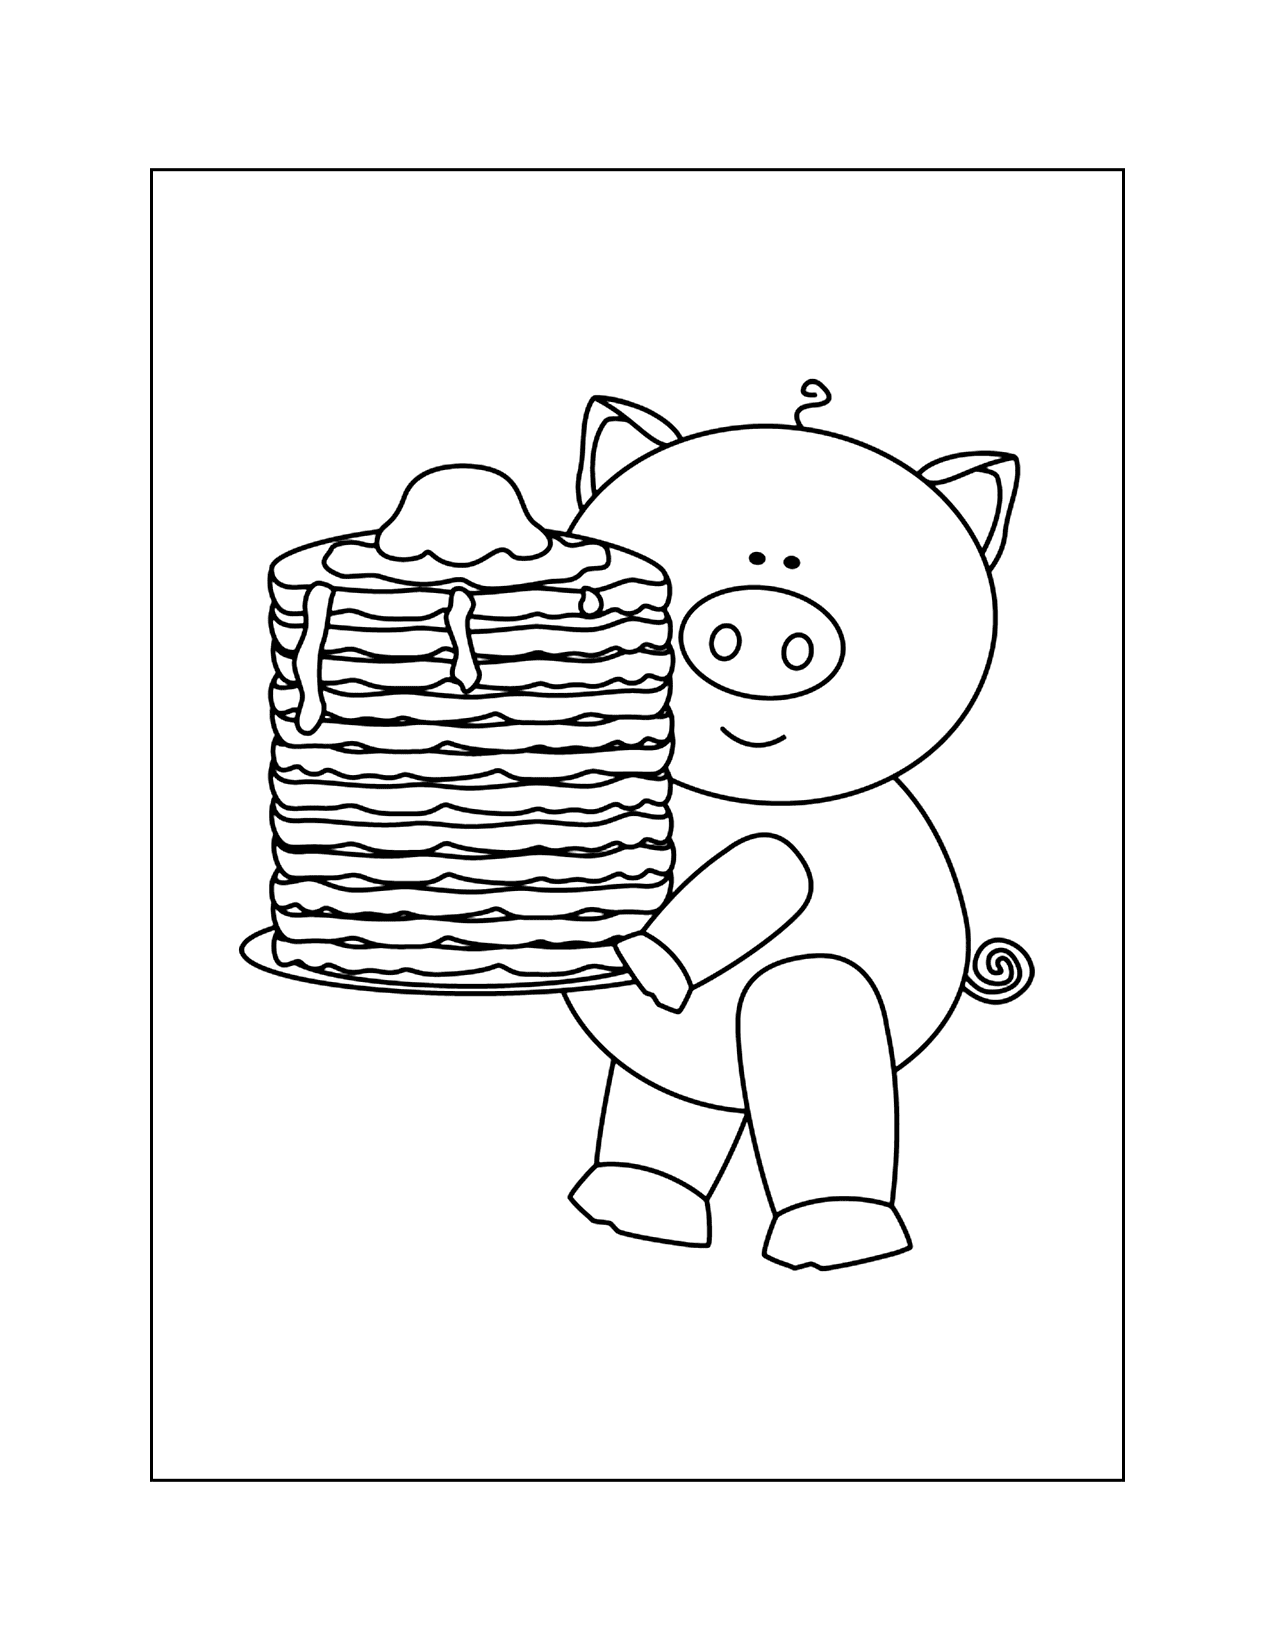 Pig With Pancakes Coloring Page